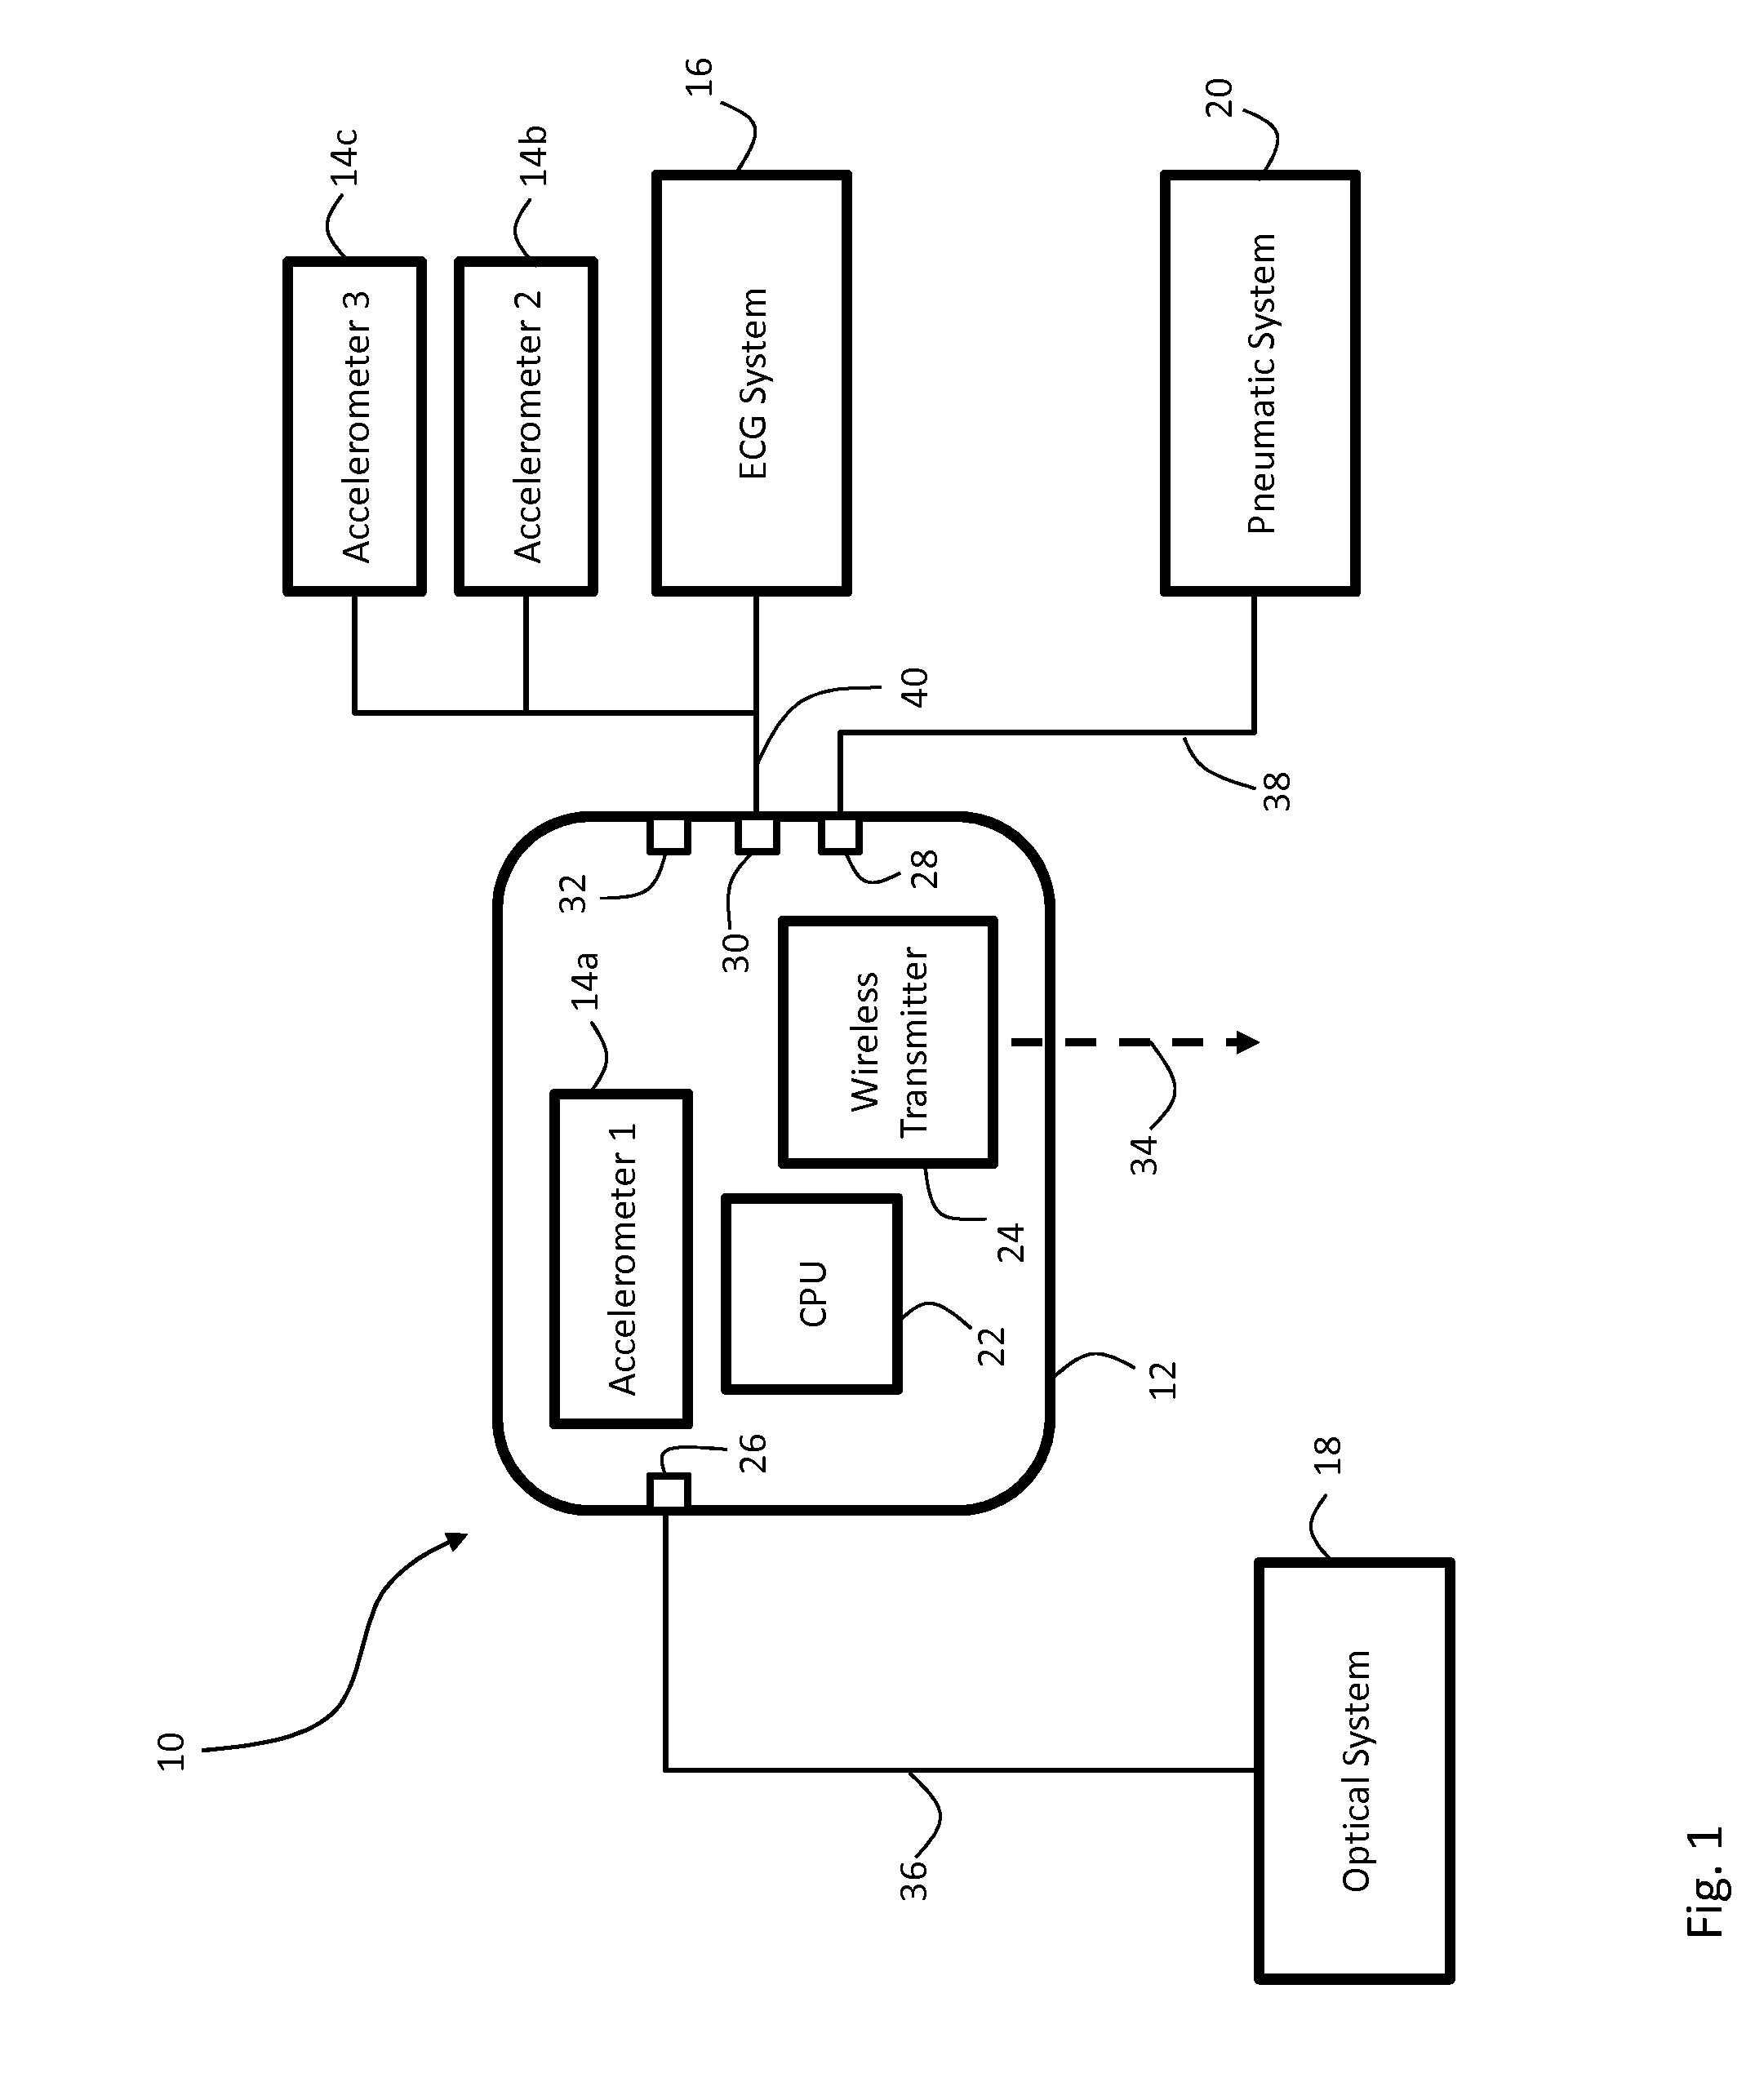 System for calibrating a ptt-based blood pressure measurement using arm height